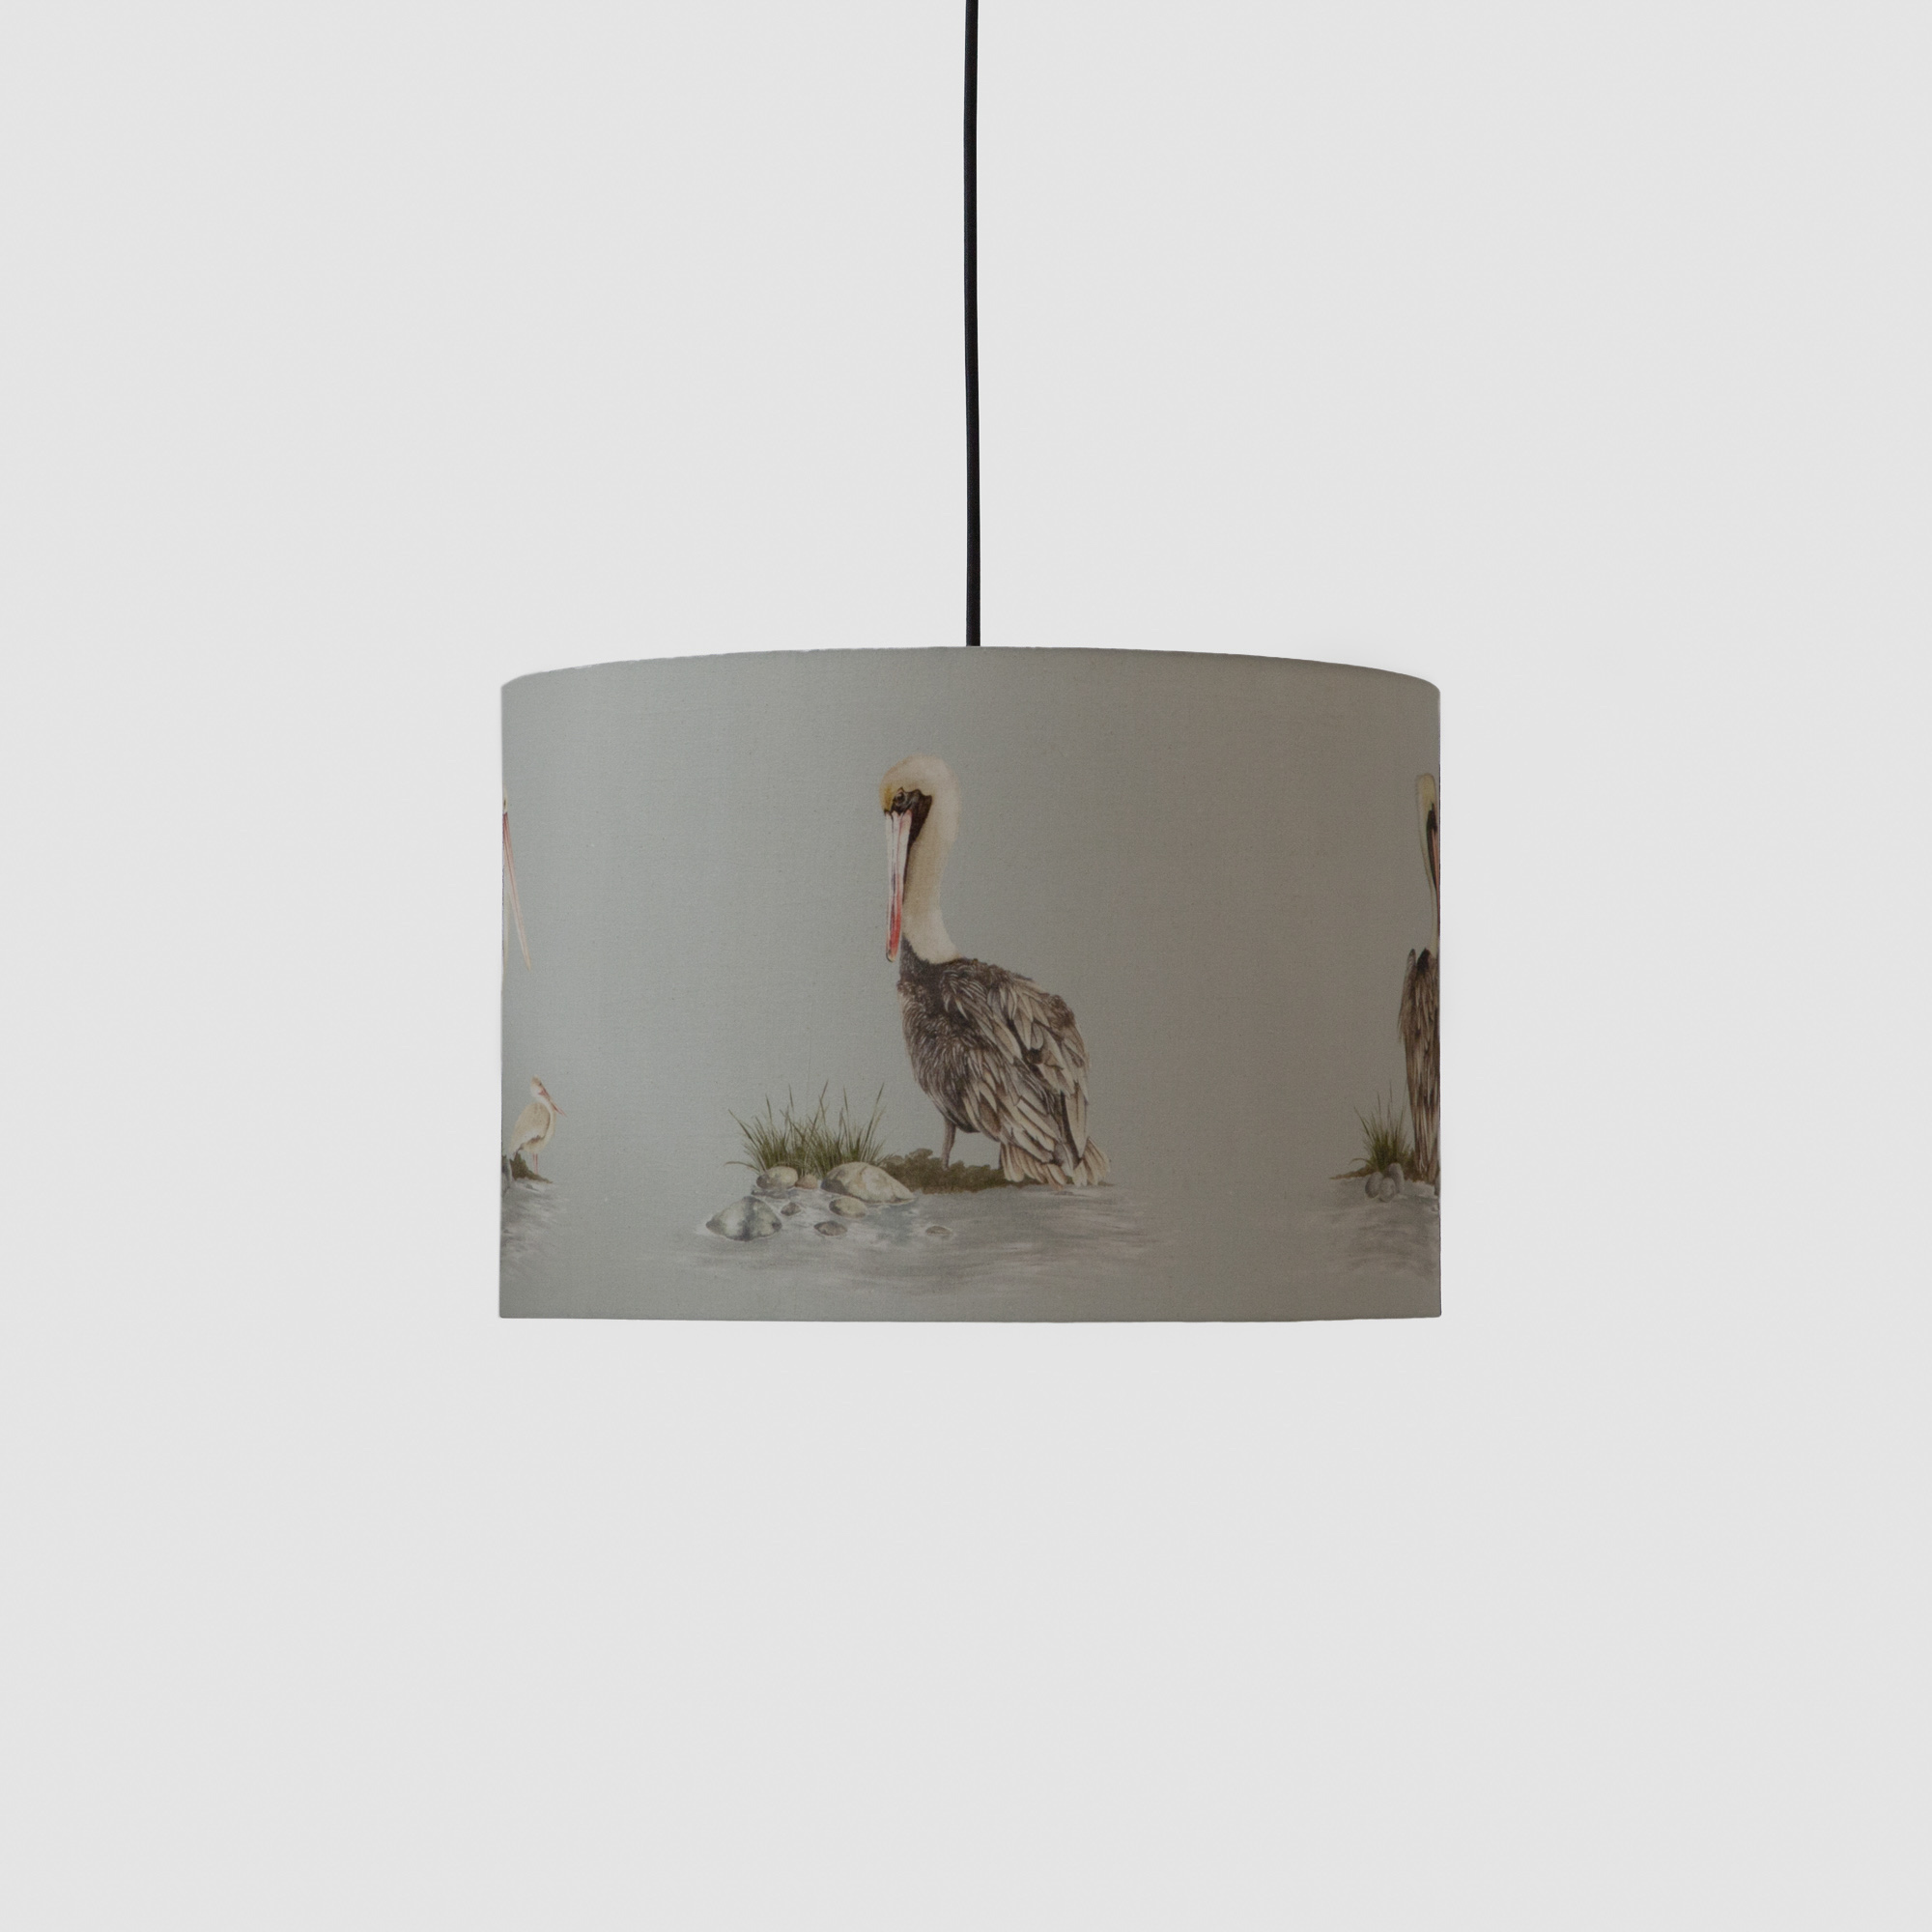 Villa Cylindrical Pendant Lamp - Poised Pelicans